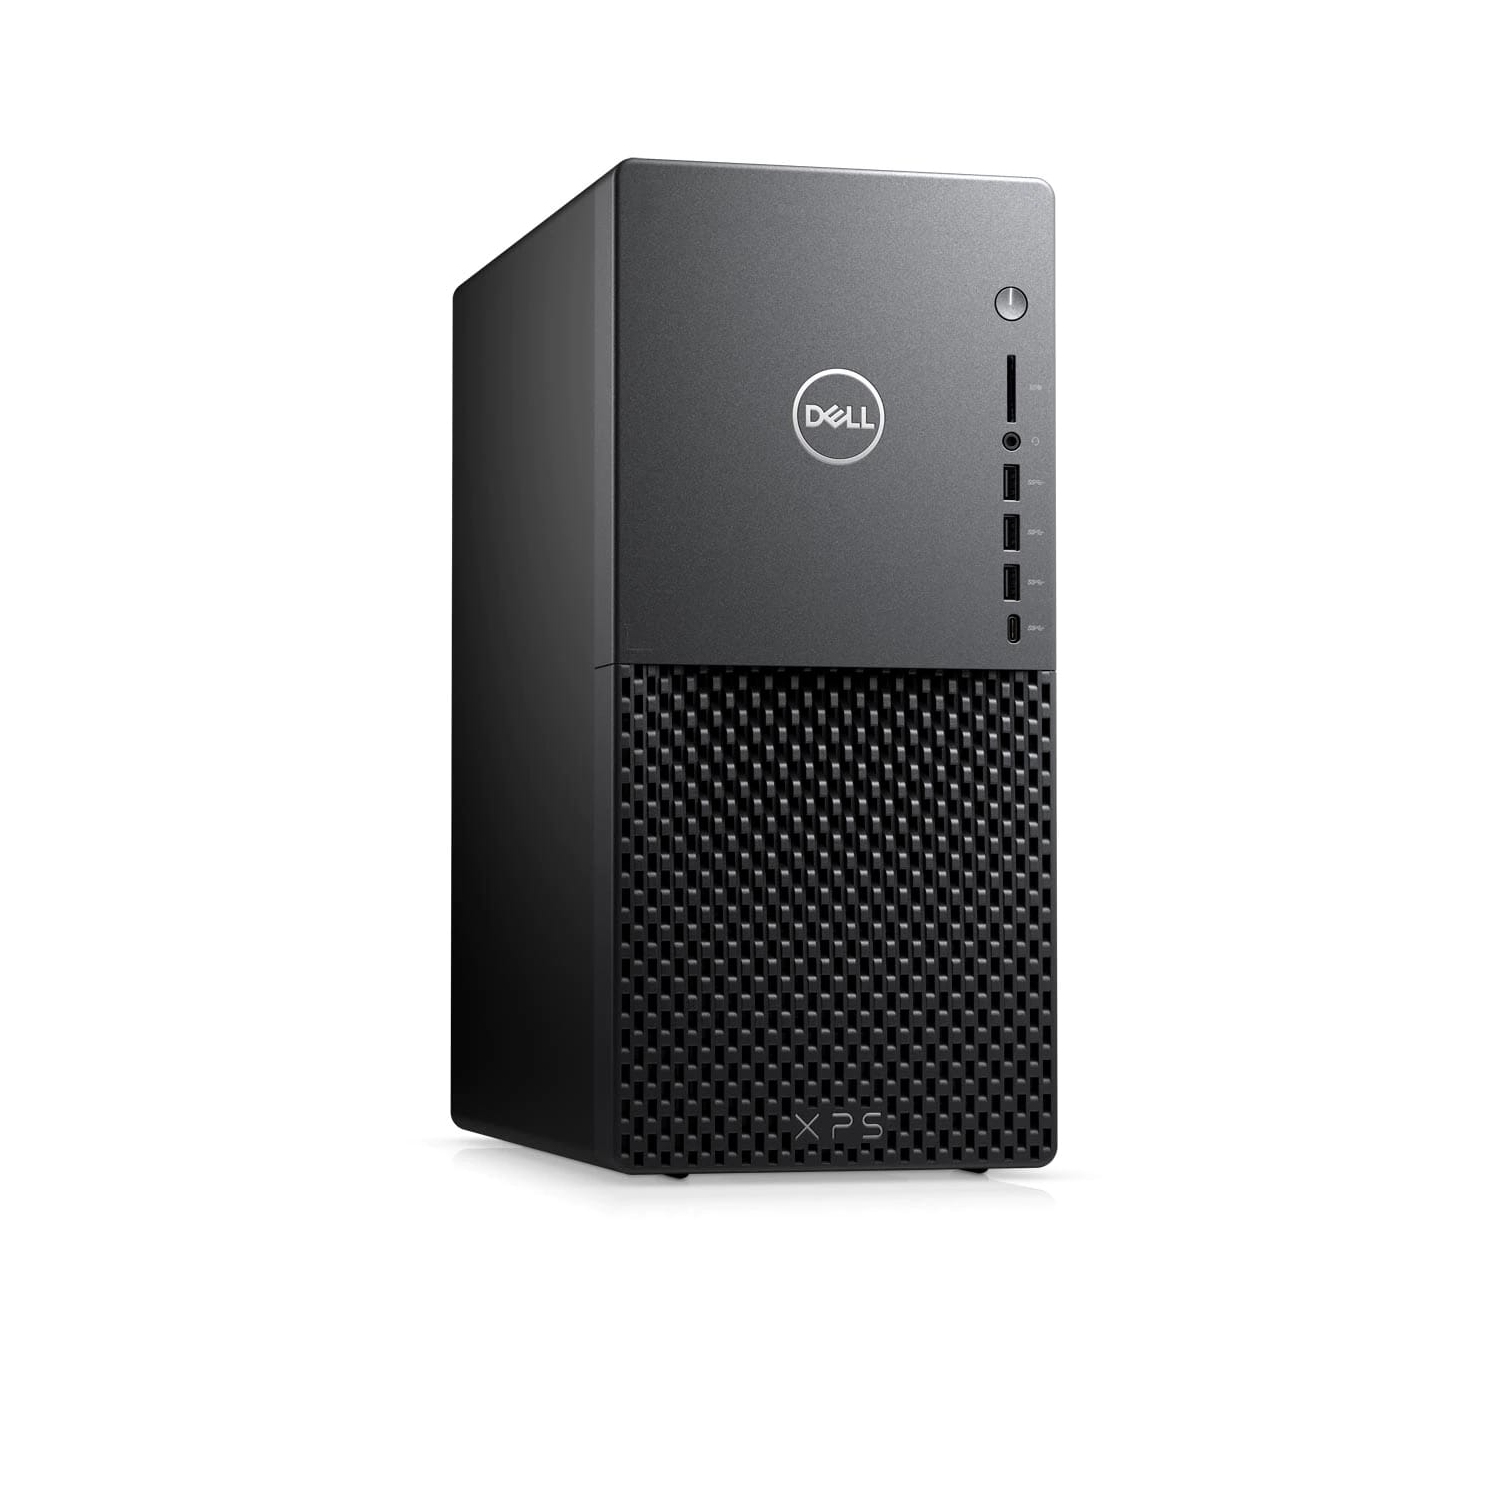 Refurbished (Excellent) - Dell XPS 8940 Desktop (2020) | Core i7 - 2TB HDD + 256GB SSD - 16GB RAM - 1660 Ti | 8 Cores @ 4.9 GHz - 11th Gen CPU Certified Refurbished